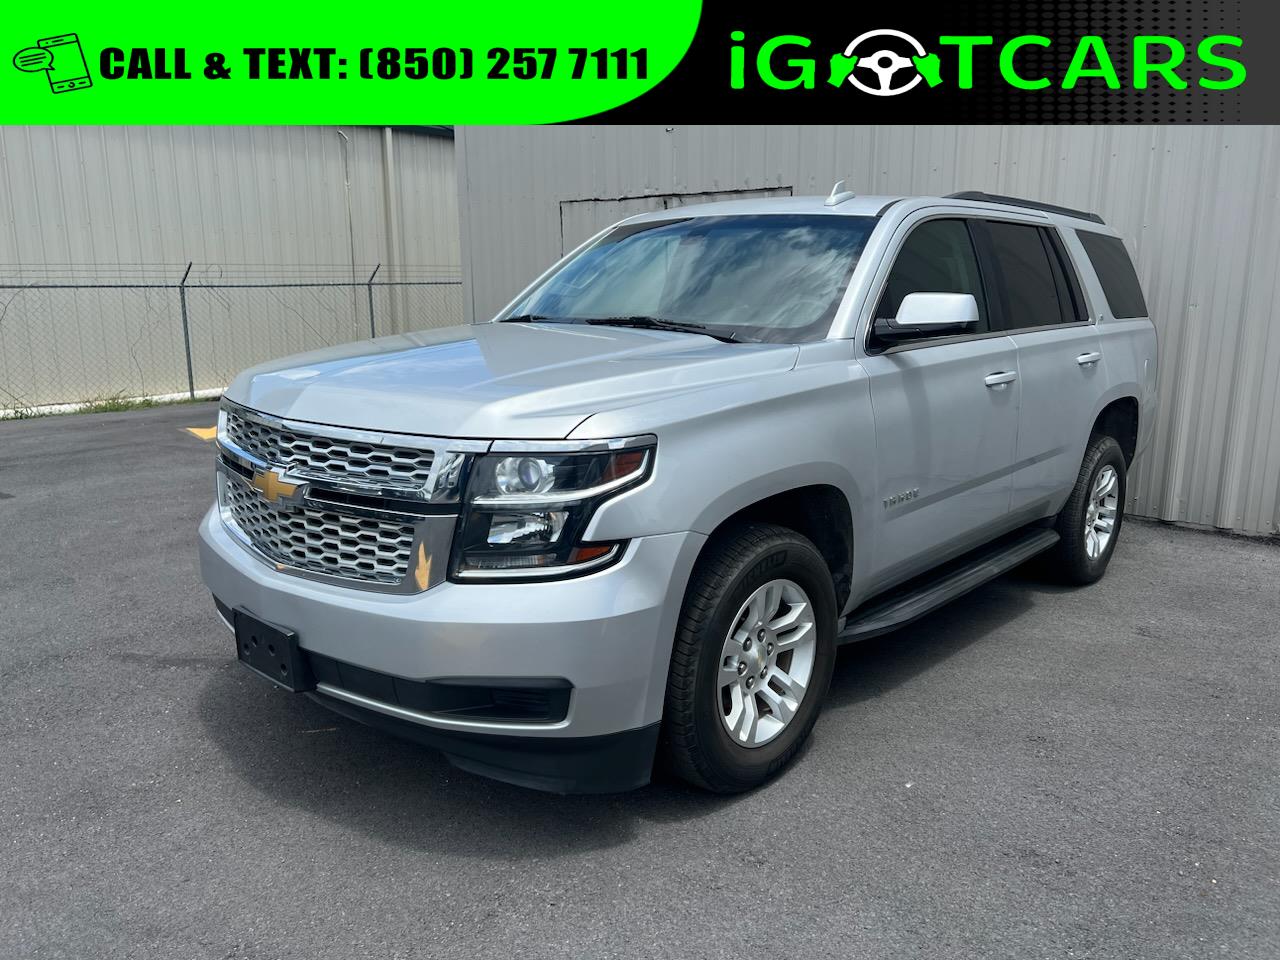 Used 2016 Chevrolet Tahoe for sale in Houston TX.  We Finance! 